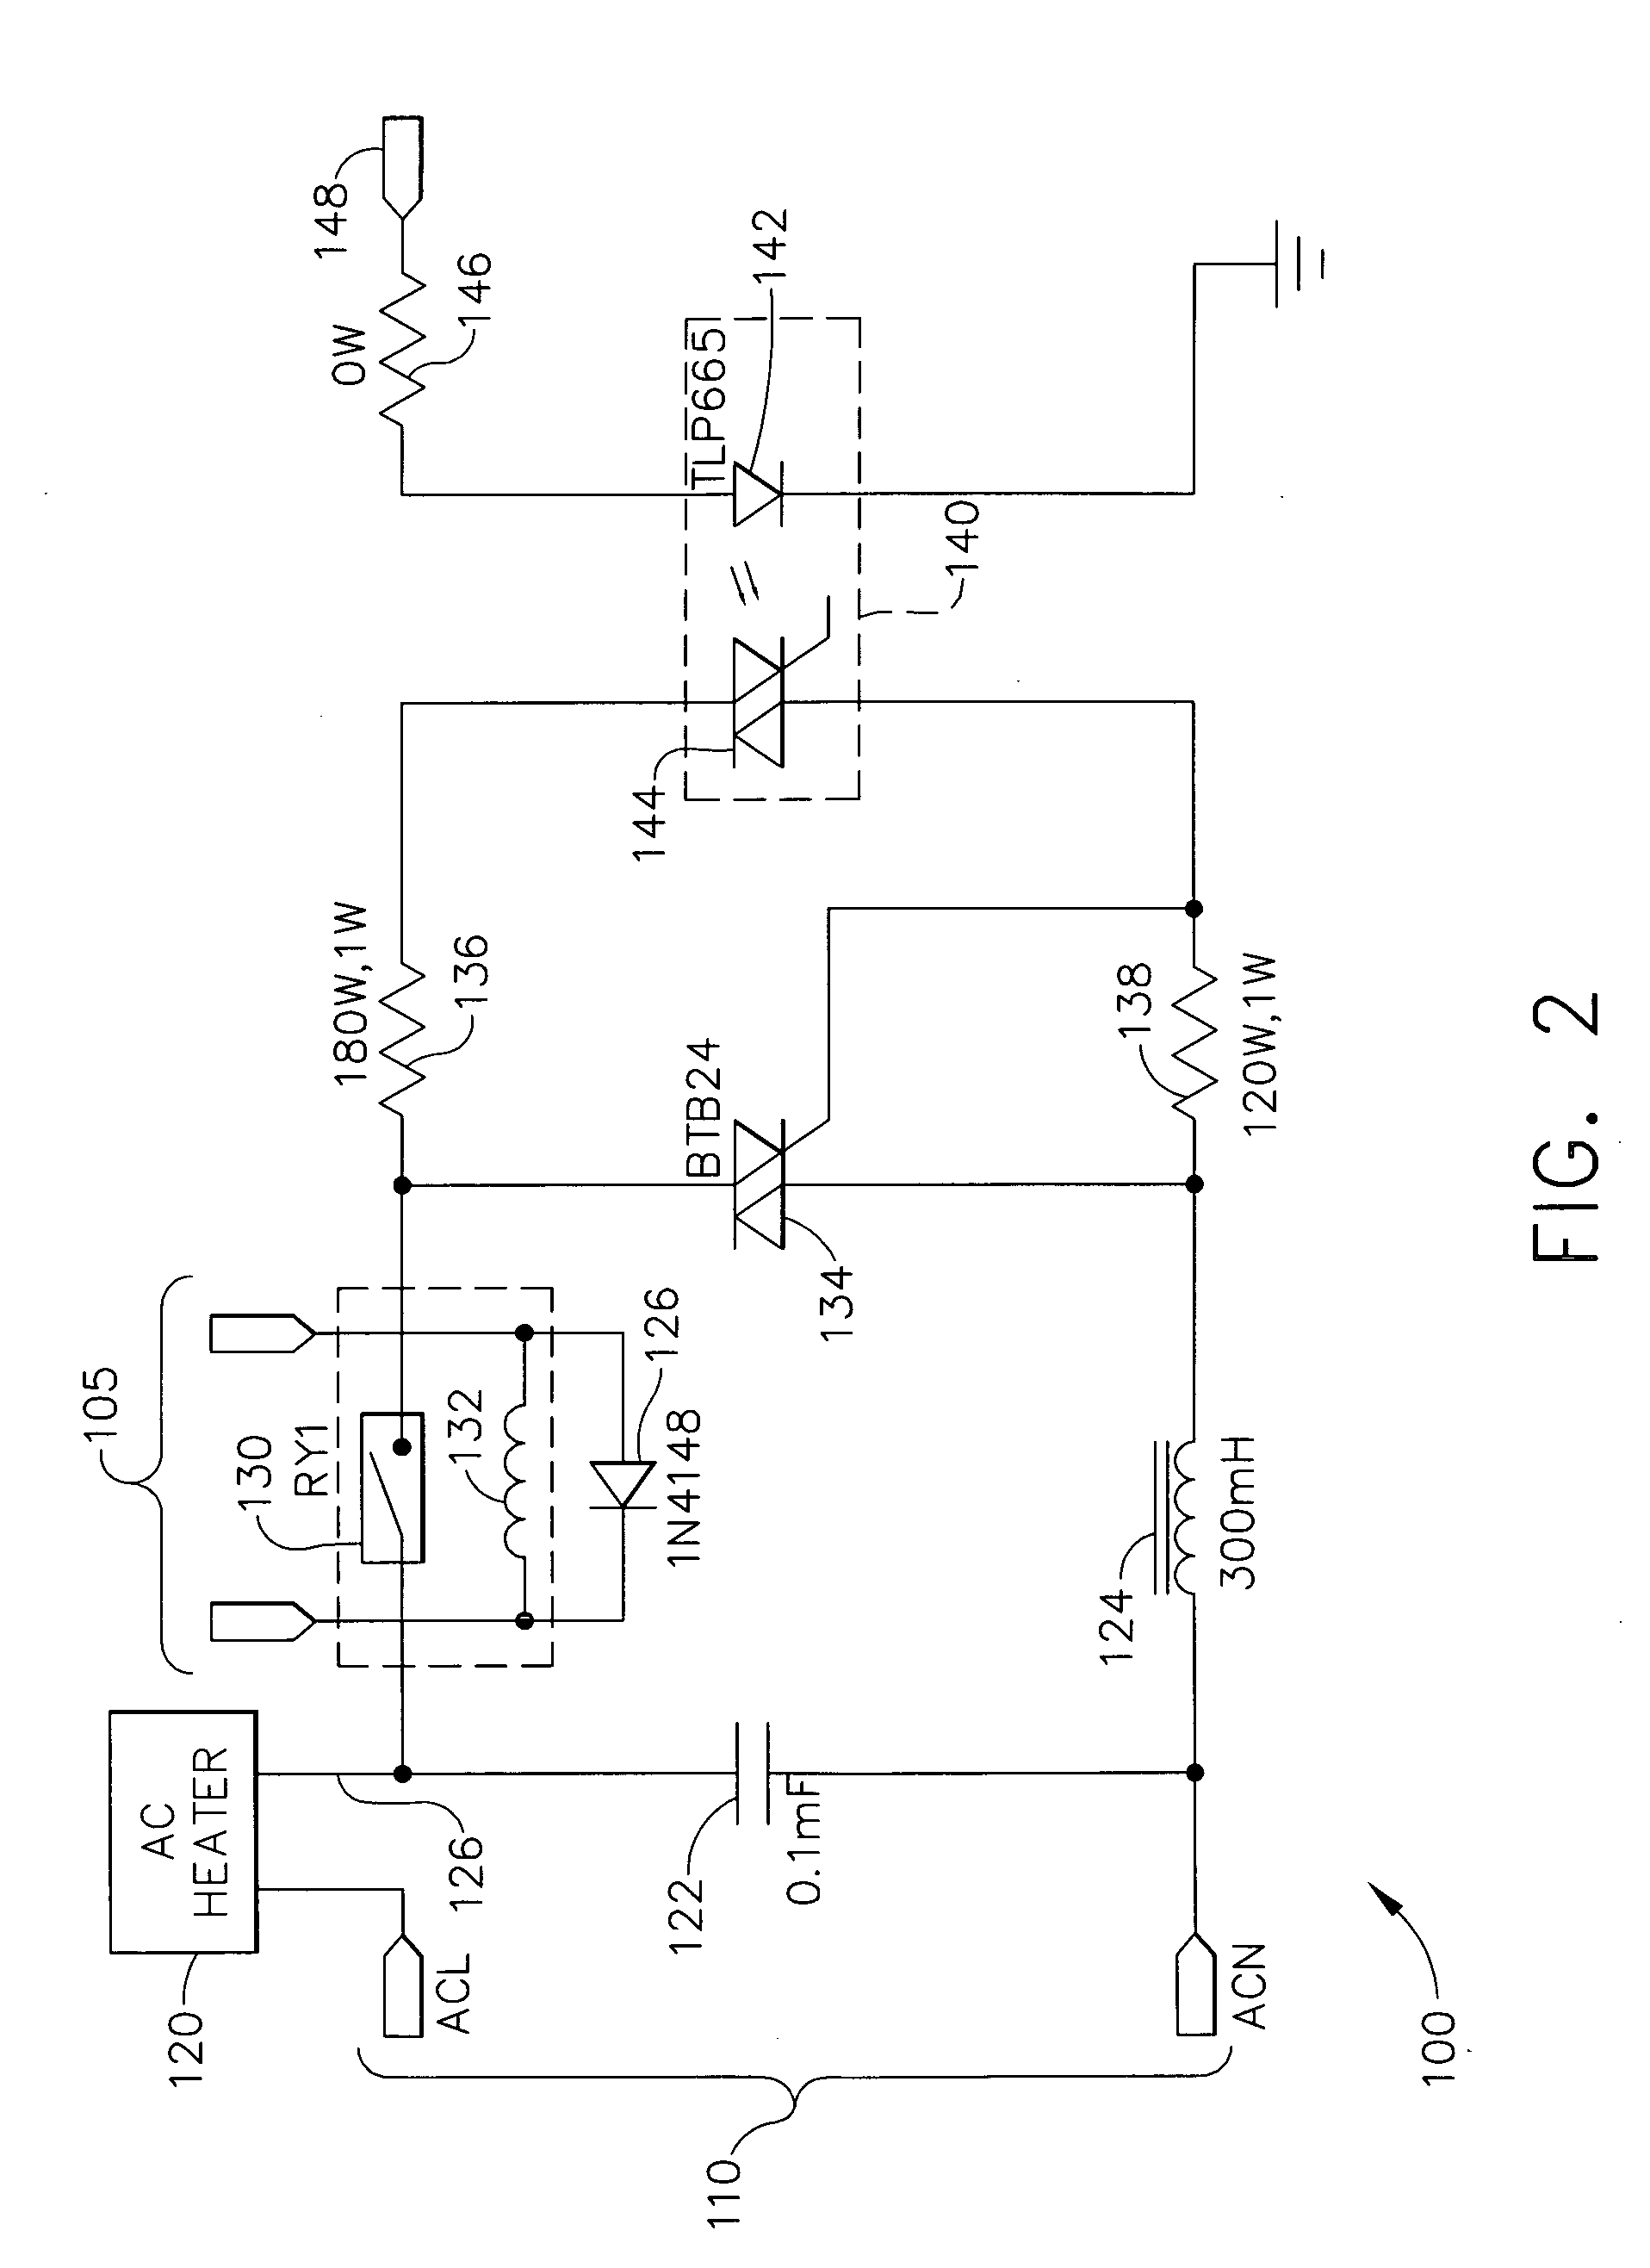 Method and apparatus for controlling temperature of a laser printer fuser with faster response time